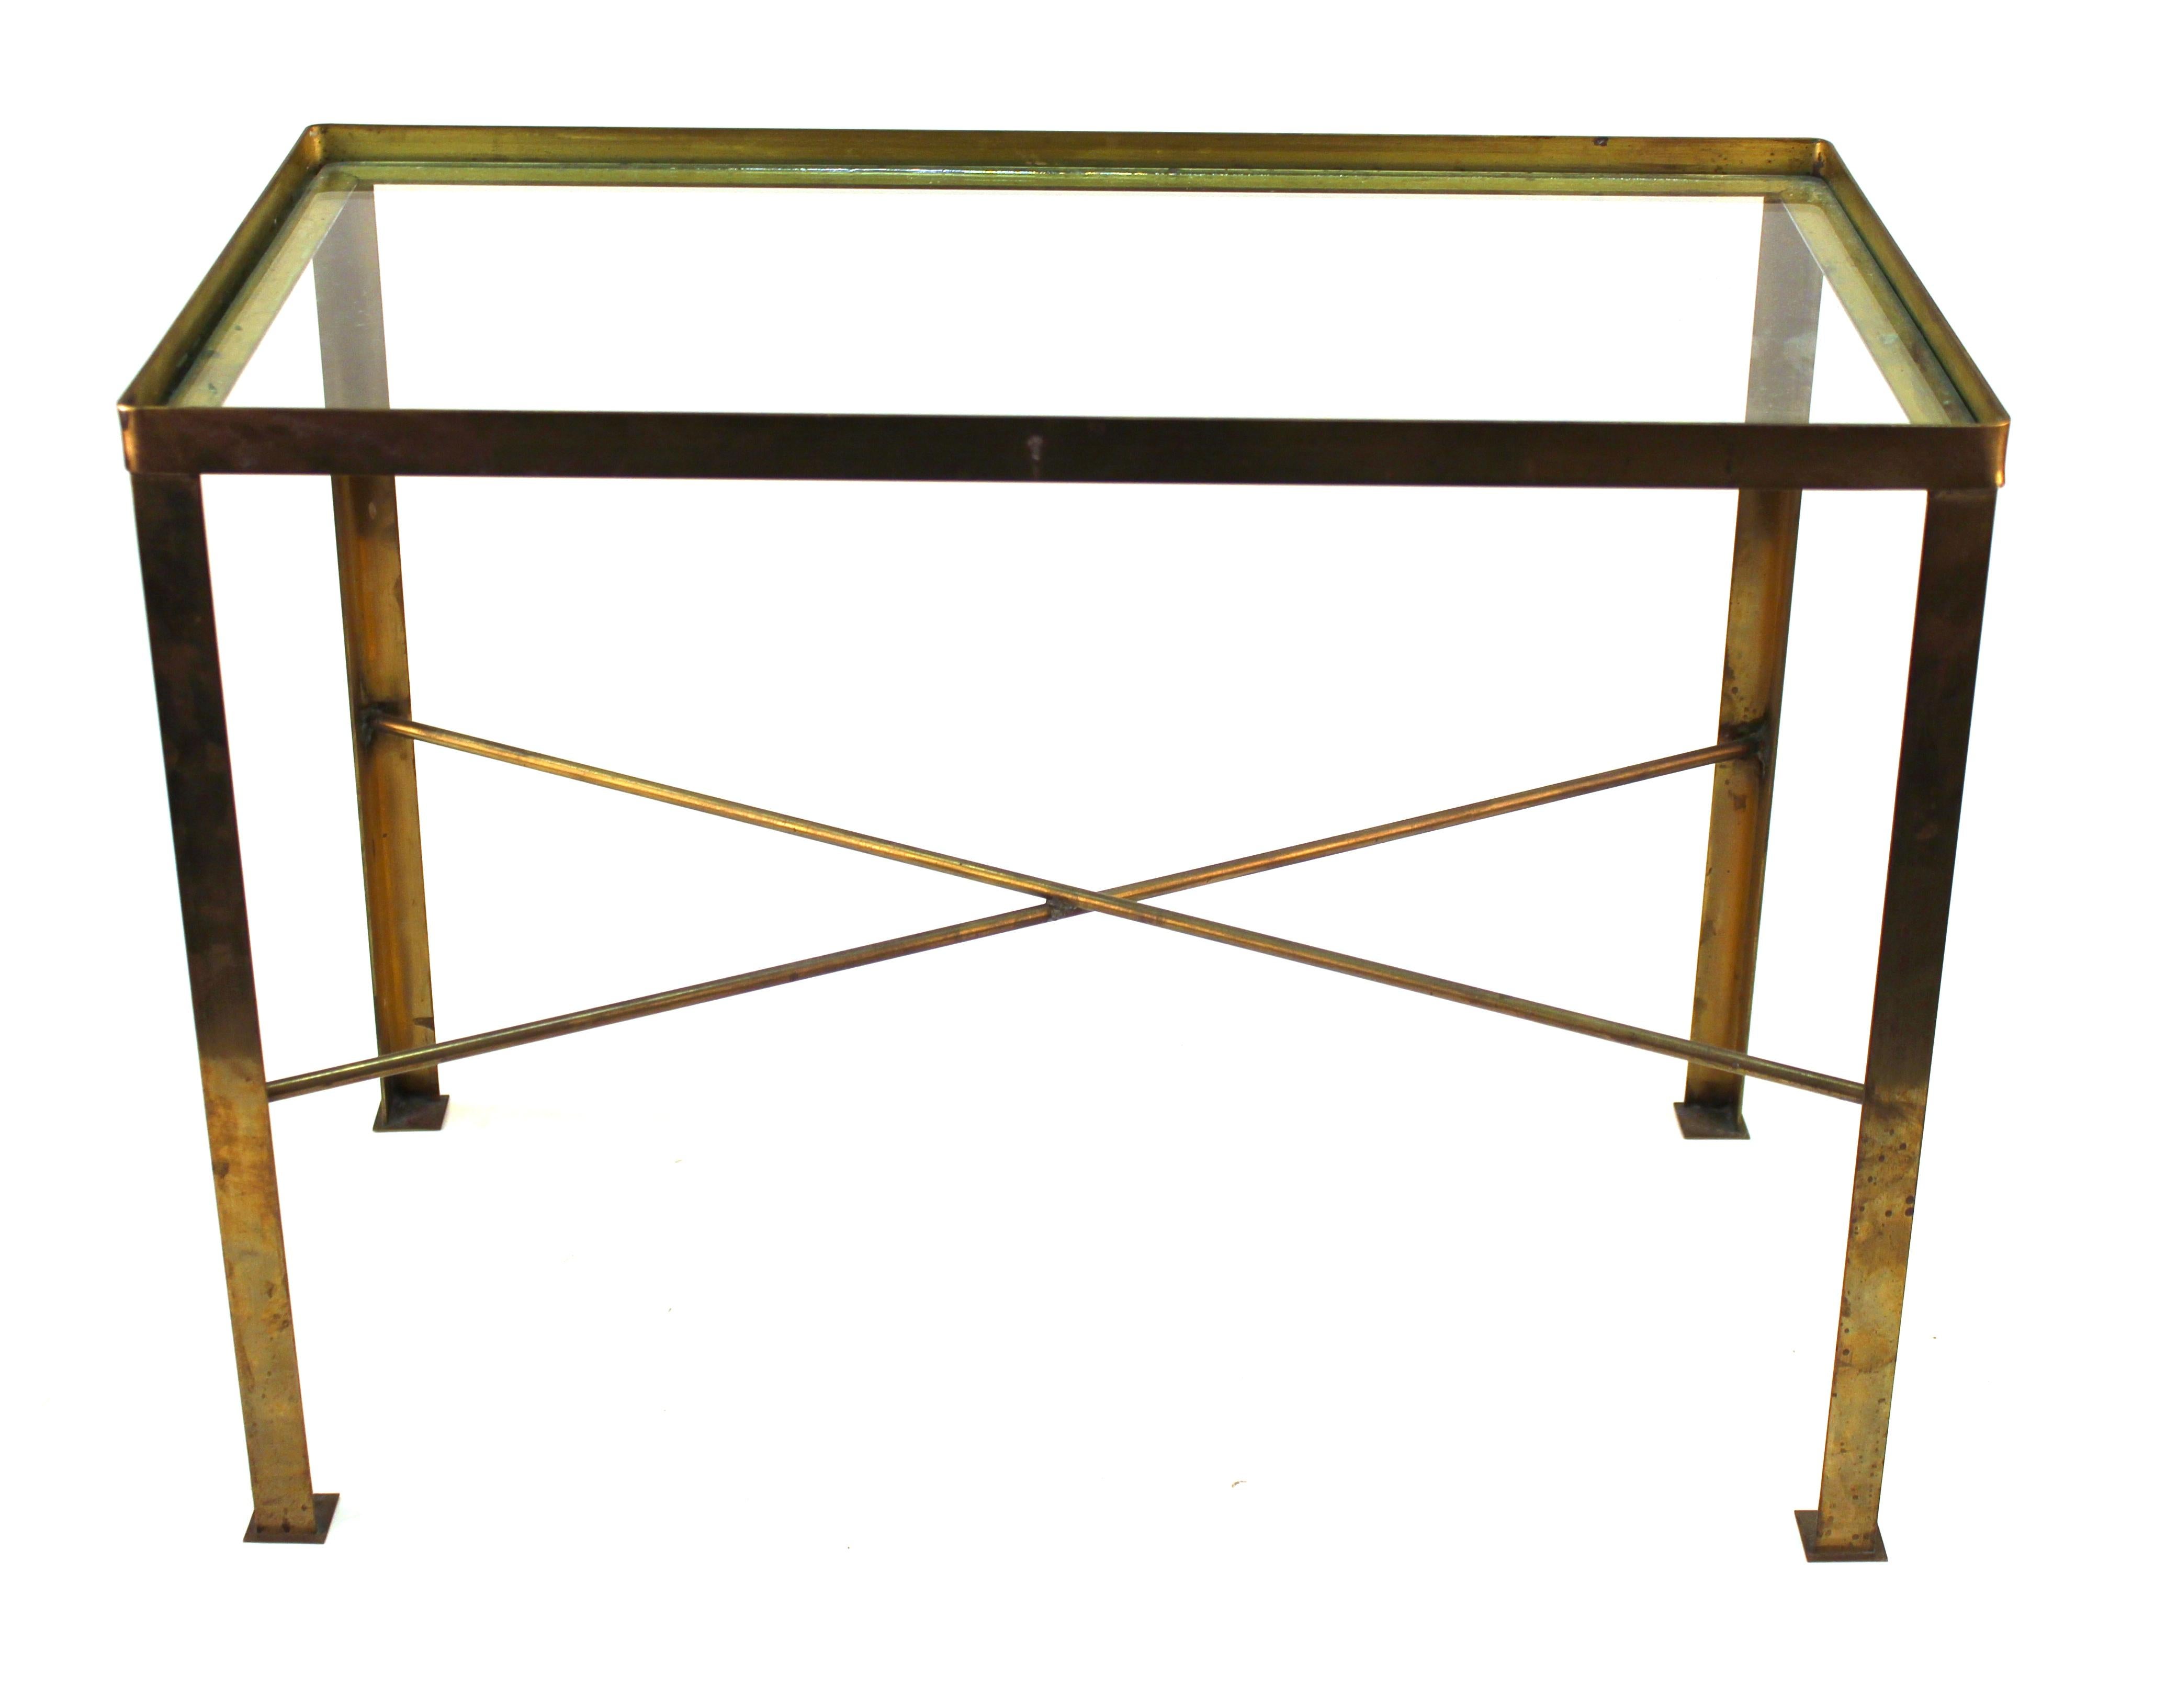 20th Century Mid-Century Modern Diminutive Brass Side Table With Glass Top